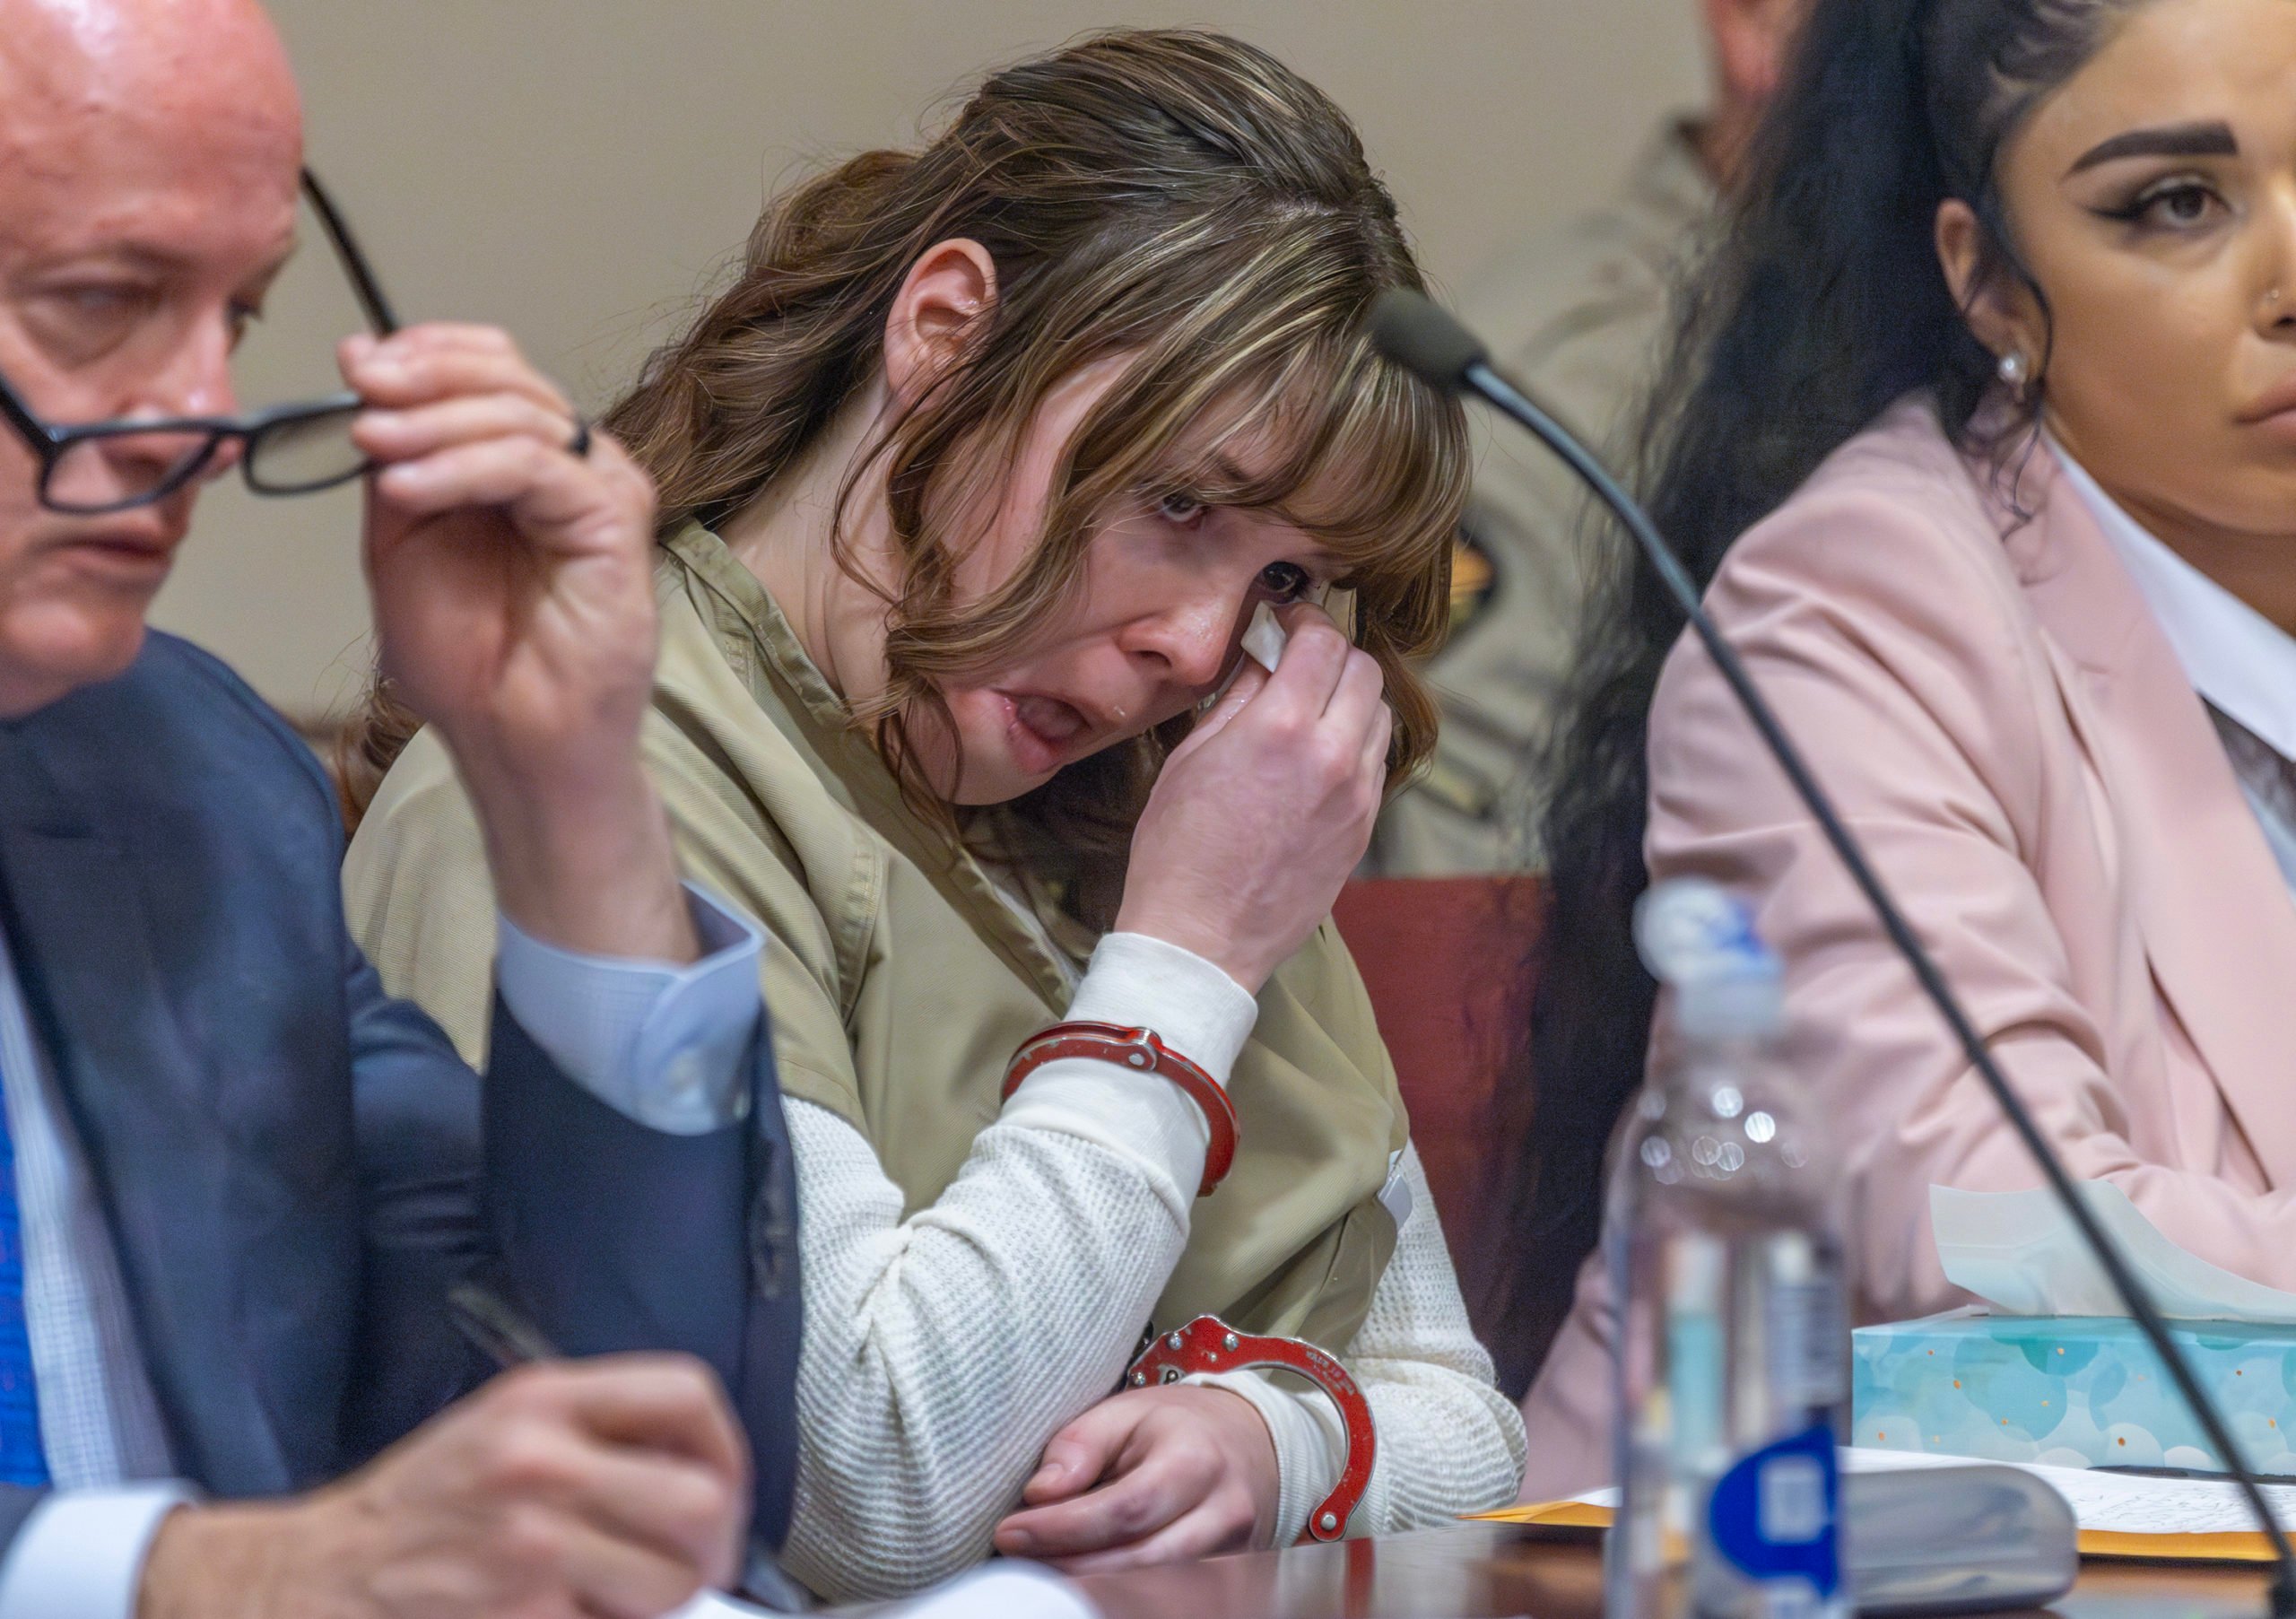 SANTA FE, NEW MEXICO - APRIL 15: Rust armorer Hannah Gutierrez-Reed wipes her tears at her sentencing at district court on April 15, 2024 in Santa Fe, New Mexico. Armorer on the set of the Western film "Rust," Gutierrez Reed was convicted by a jury of involuntary manslaughter in the death of cinematographer Halyna Hutchins who was fatally shot by Alec Baldwin in 2021. Gutierrez Reed was sentenced to 18 months in prison. (Photo by Luis Sánchez Saturno-Pool/Getty Images)